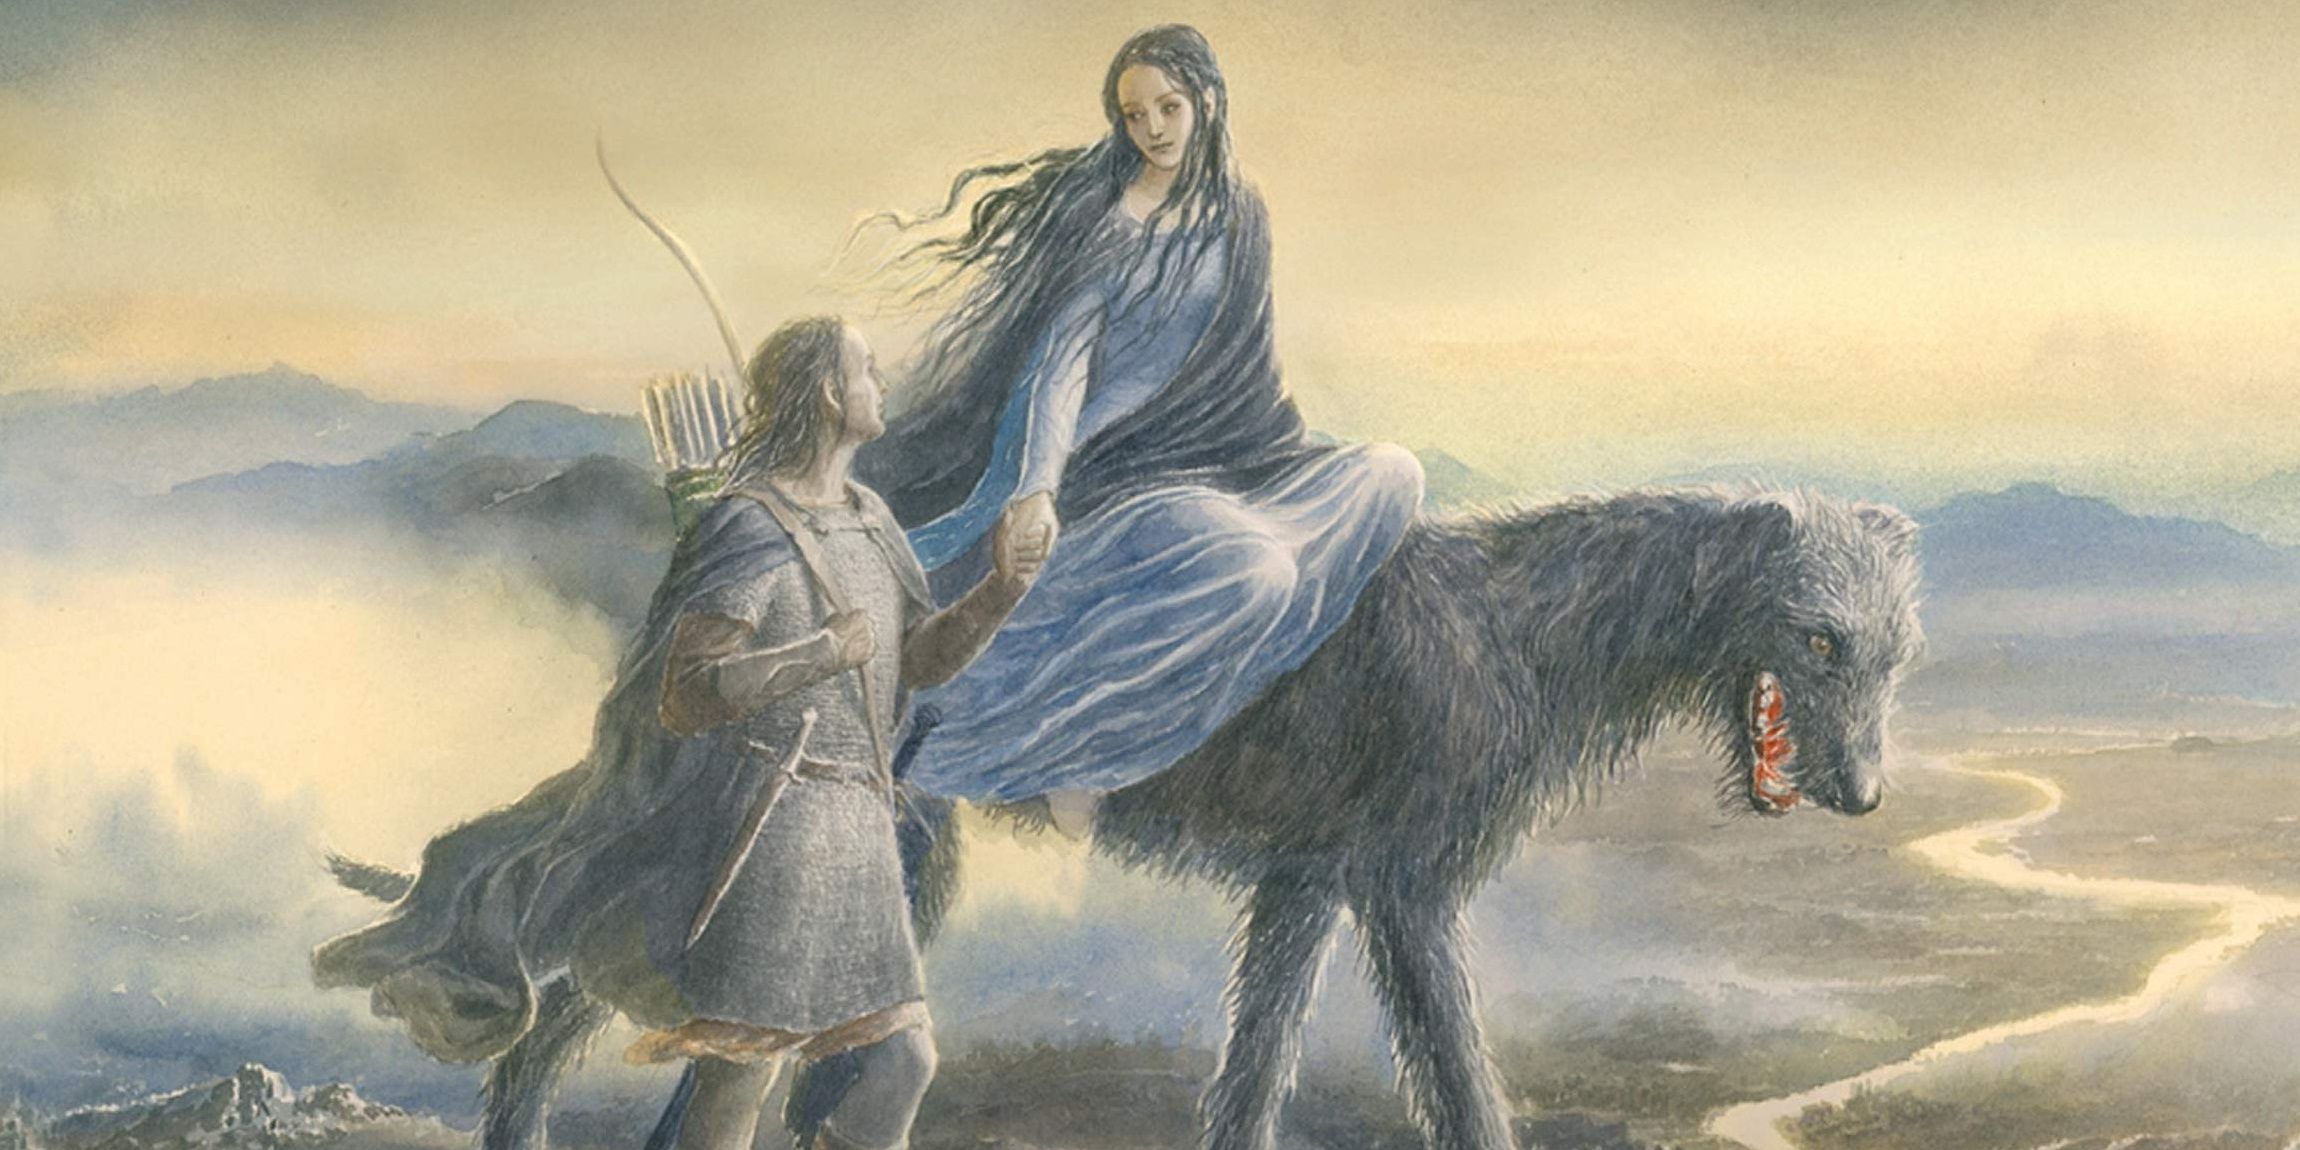 Beren and Luthien by Alan Lee